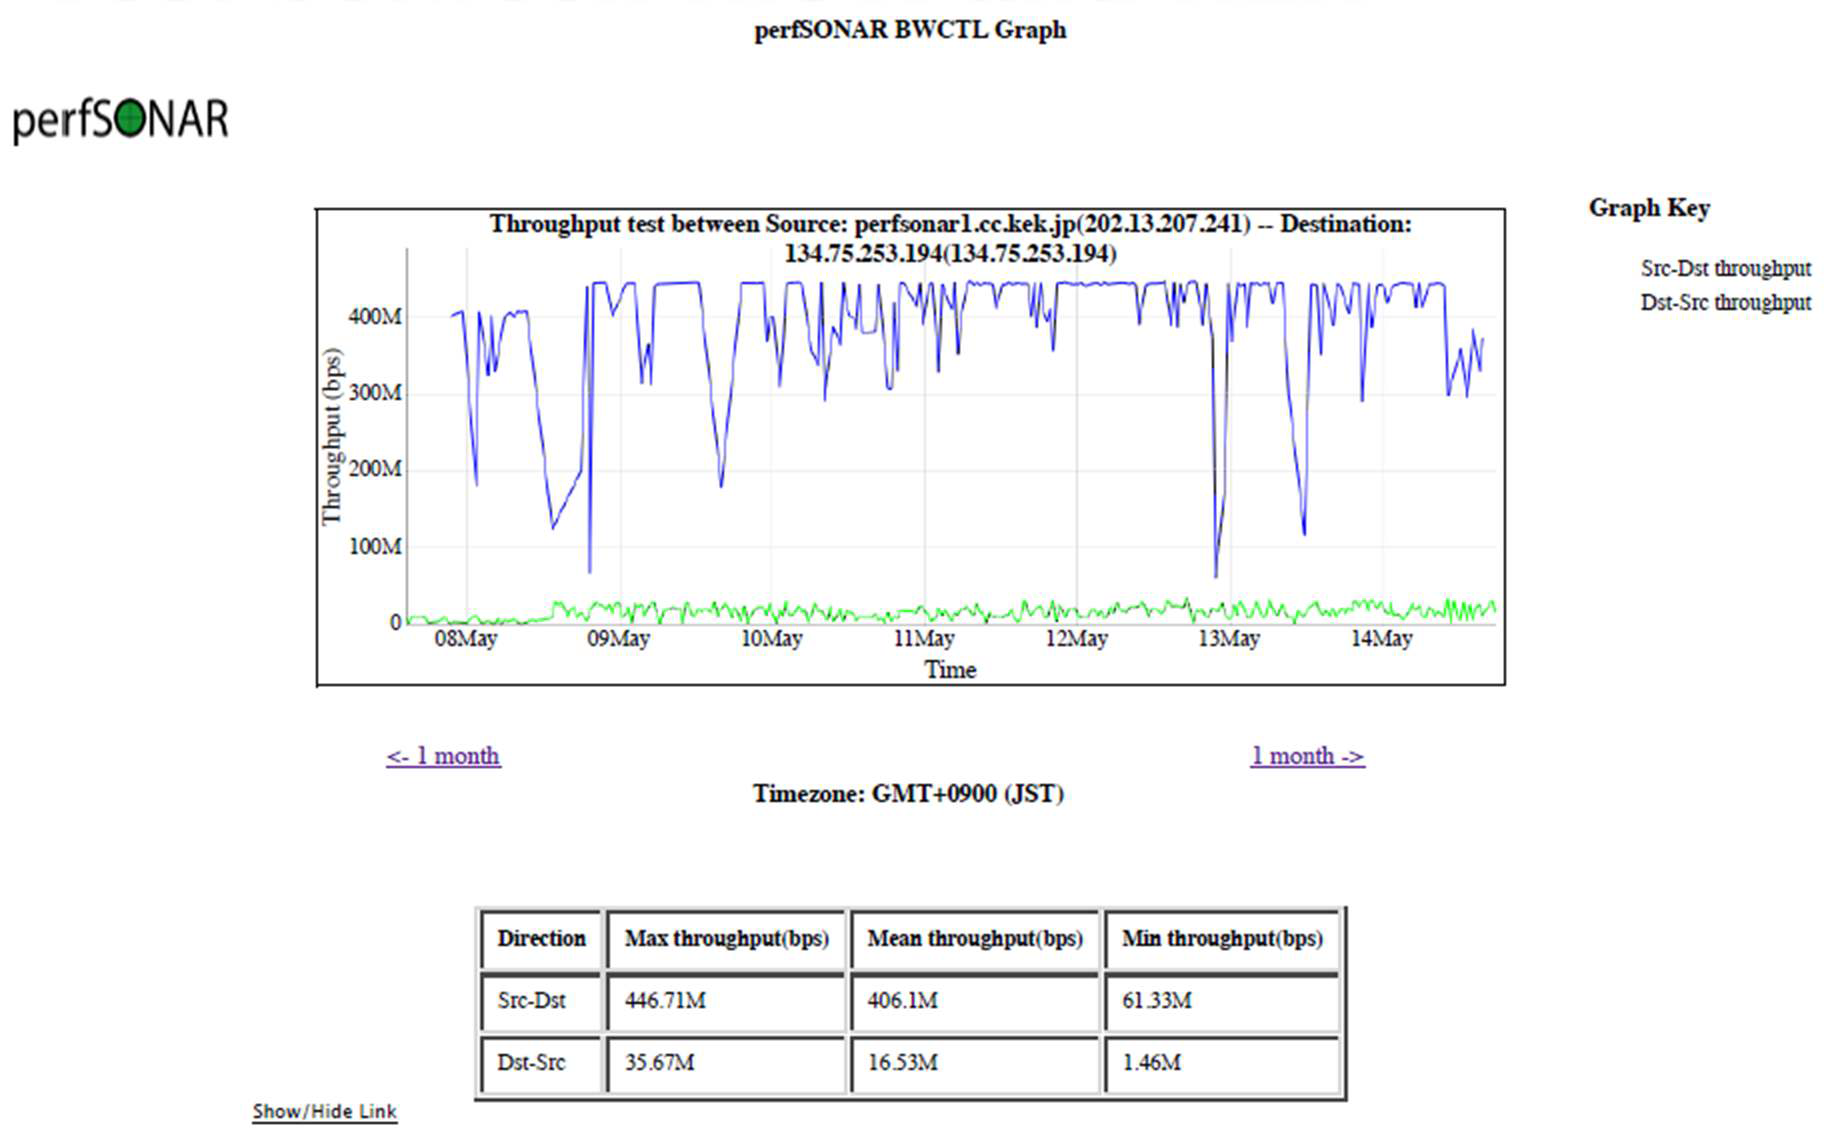 Result of network performance test between KISTI and KIT